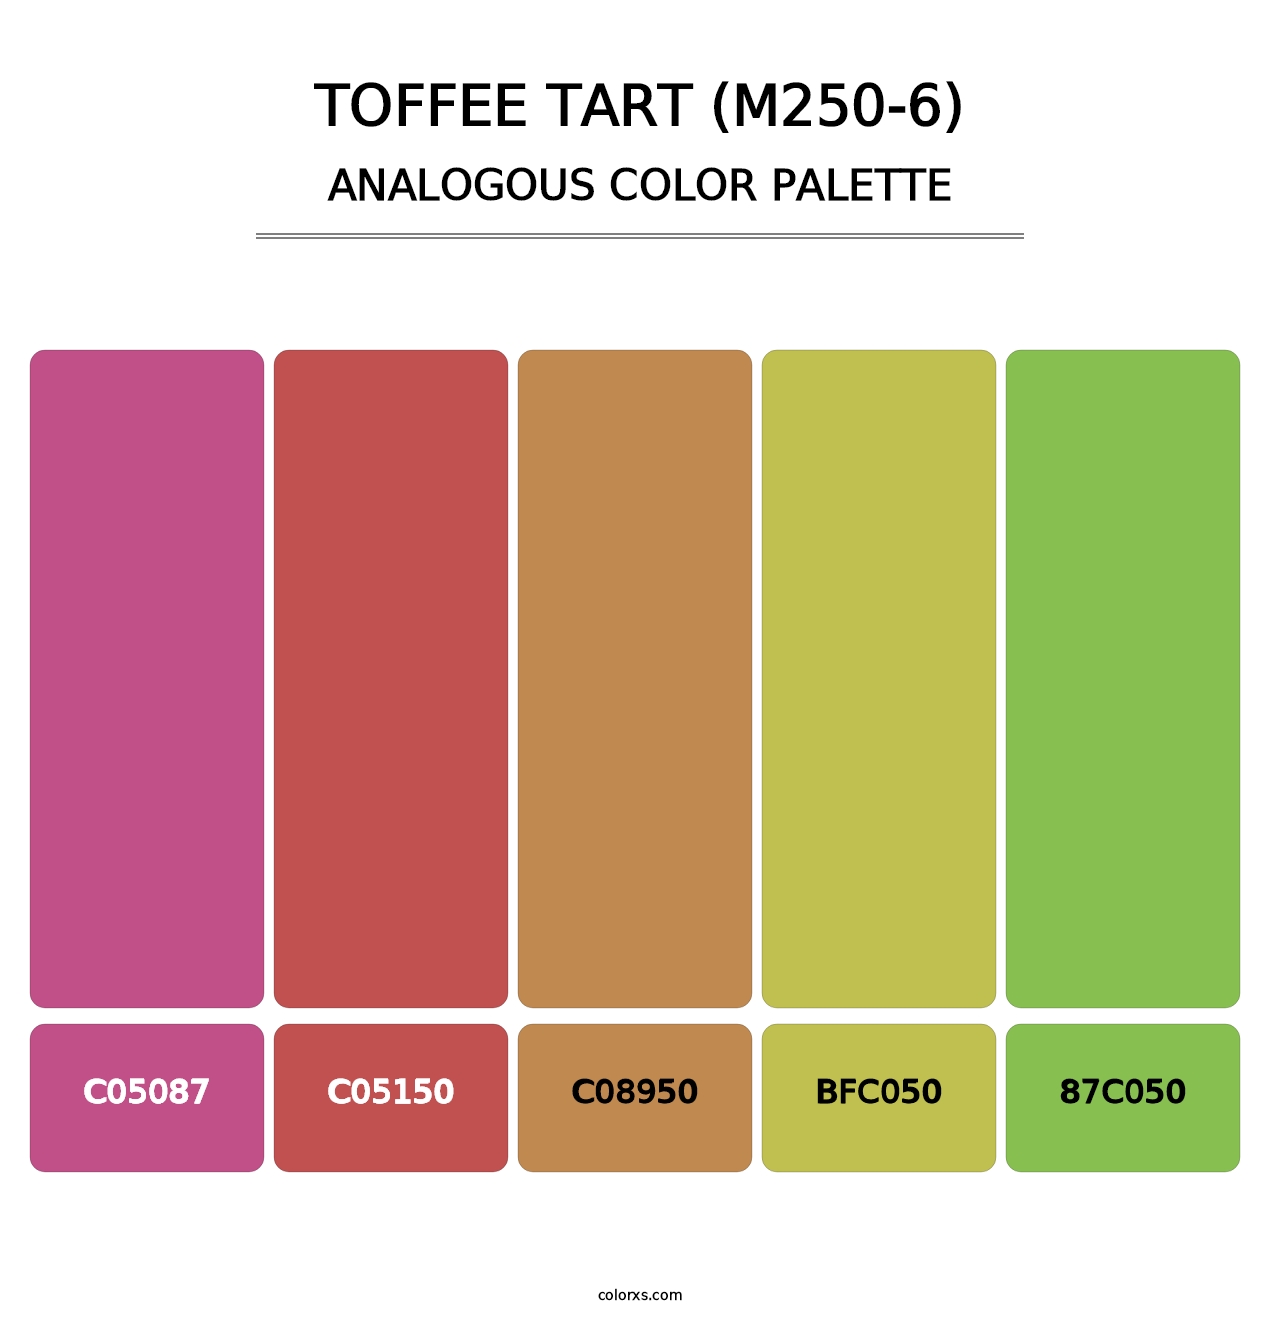 Toffee Tart (M250-6) - Analogous Color Palette